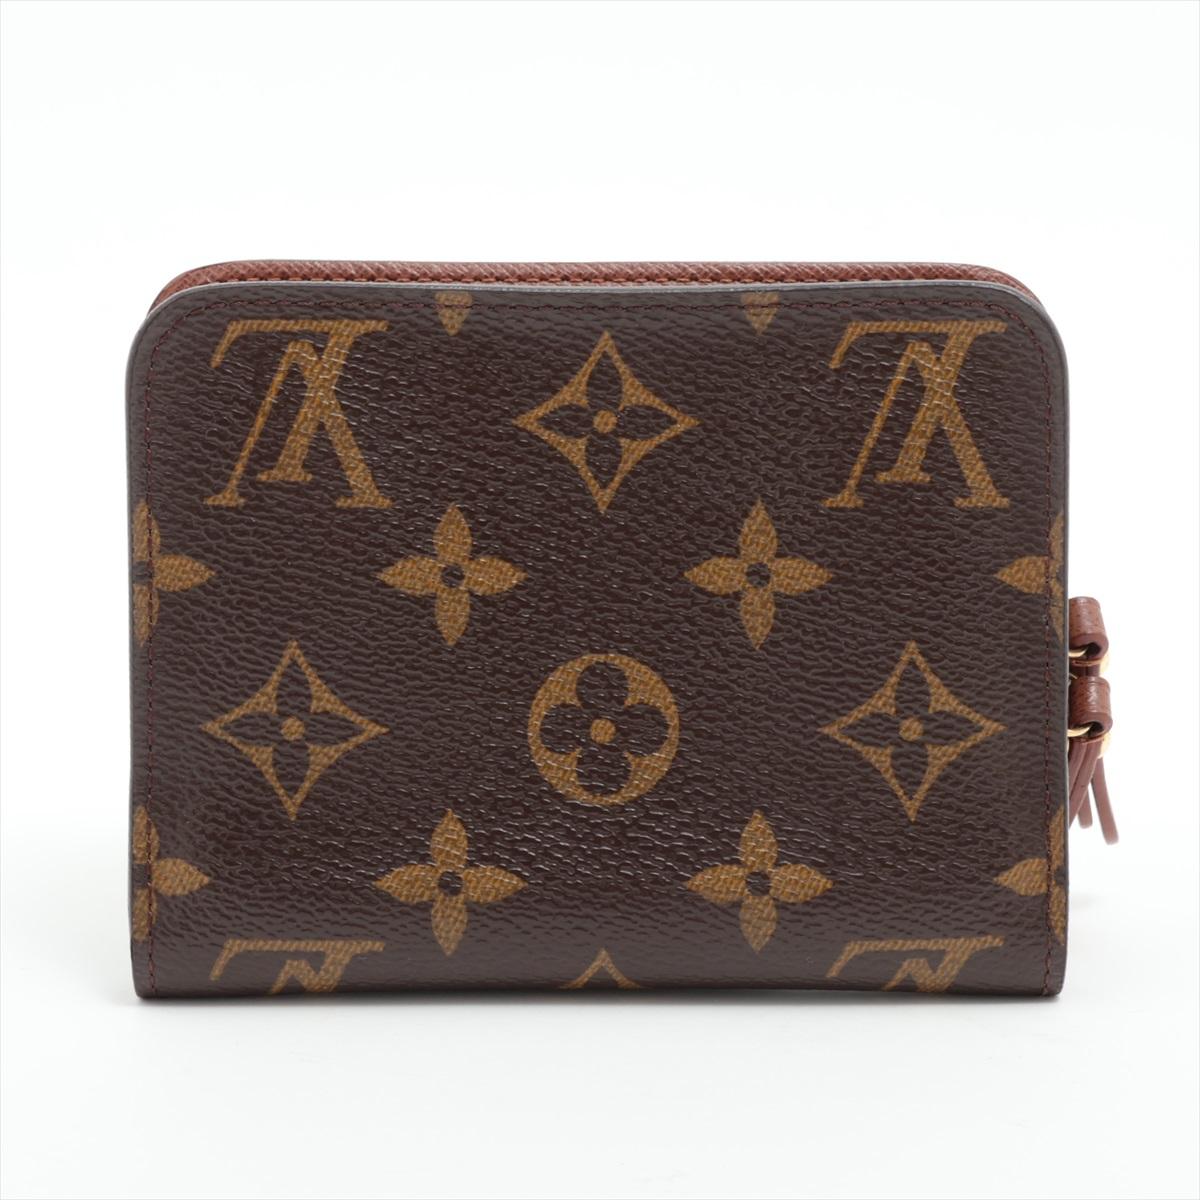 The Louis Vuitton Monogram Insolite Bifold Short Wallet is a stylish and practical accessory designed for everyday use. Made from the iconic Monogram canvas, the wallet showcases Louis Vuitton's timeless design. Its compact bifold silhouette opens